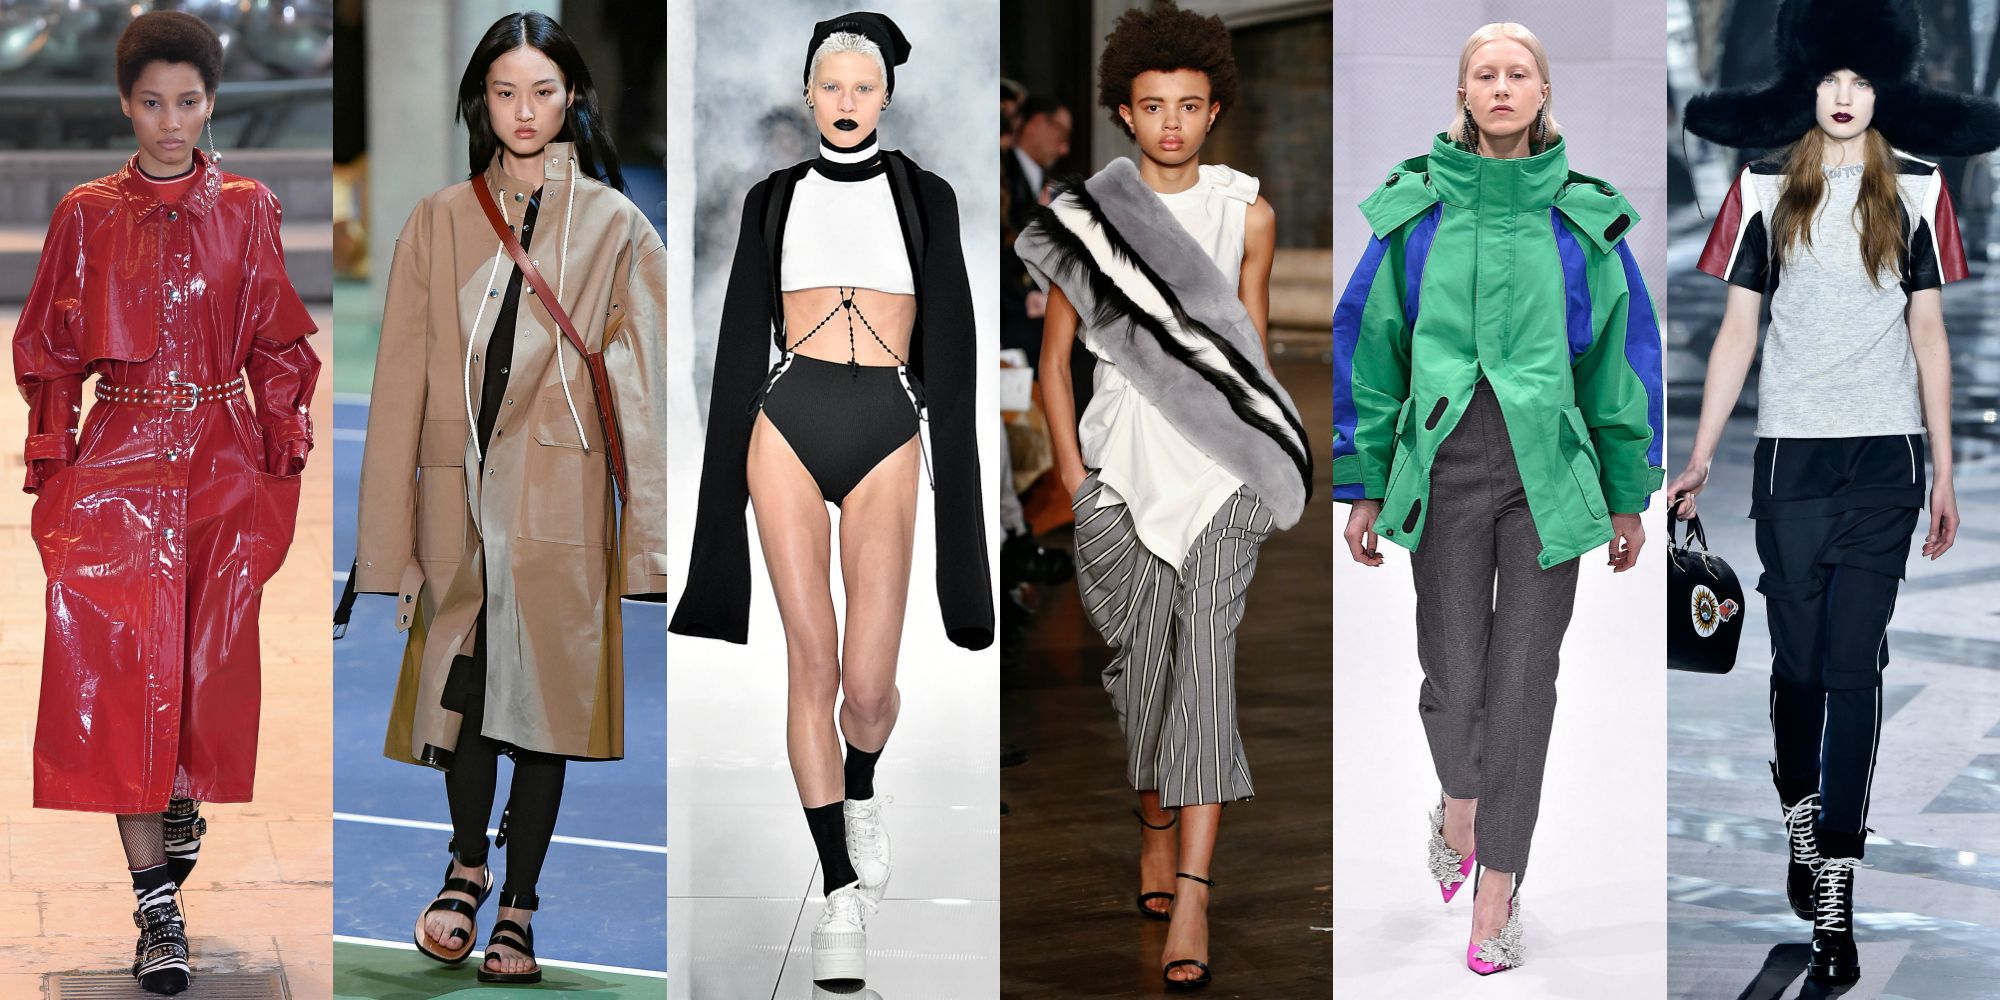 The Fashion Trends of Winter 2021: Your Guide